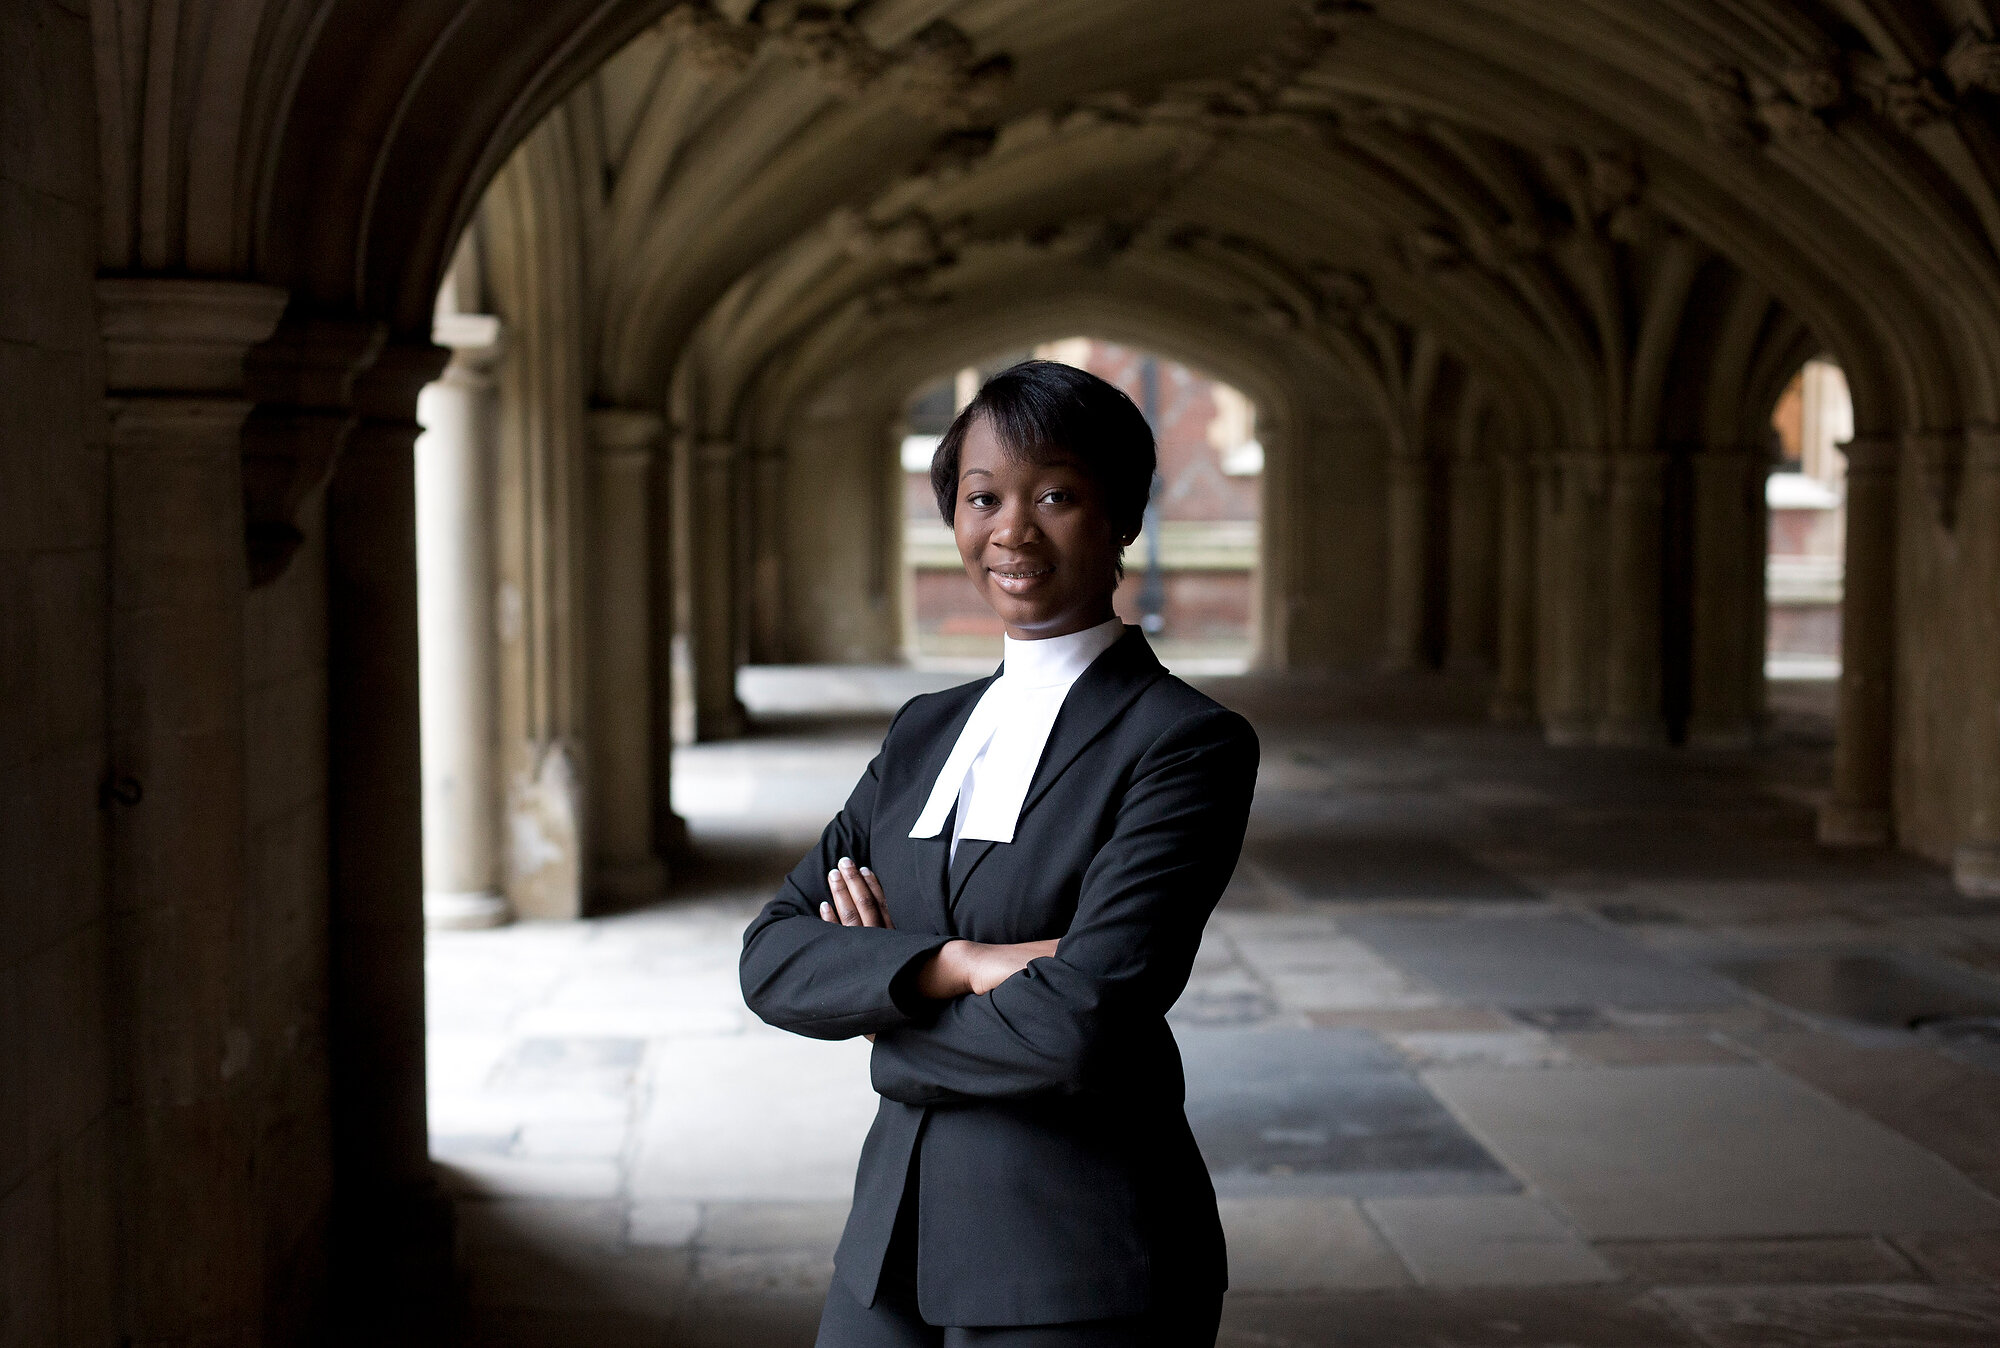  Gabrielle Turnquest, was at 18, the youngest person in the history of the English and Welsh legal system to be called to The Bar after passing The University of Law’s Bar Professional Training Course. Lincoln’s Inn, London. Photo: Neil Hall, 30 July